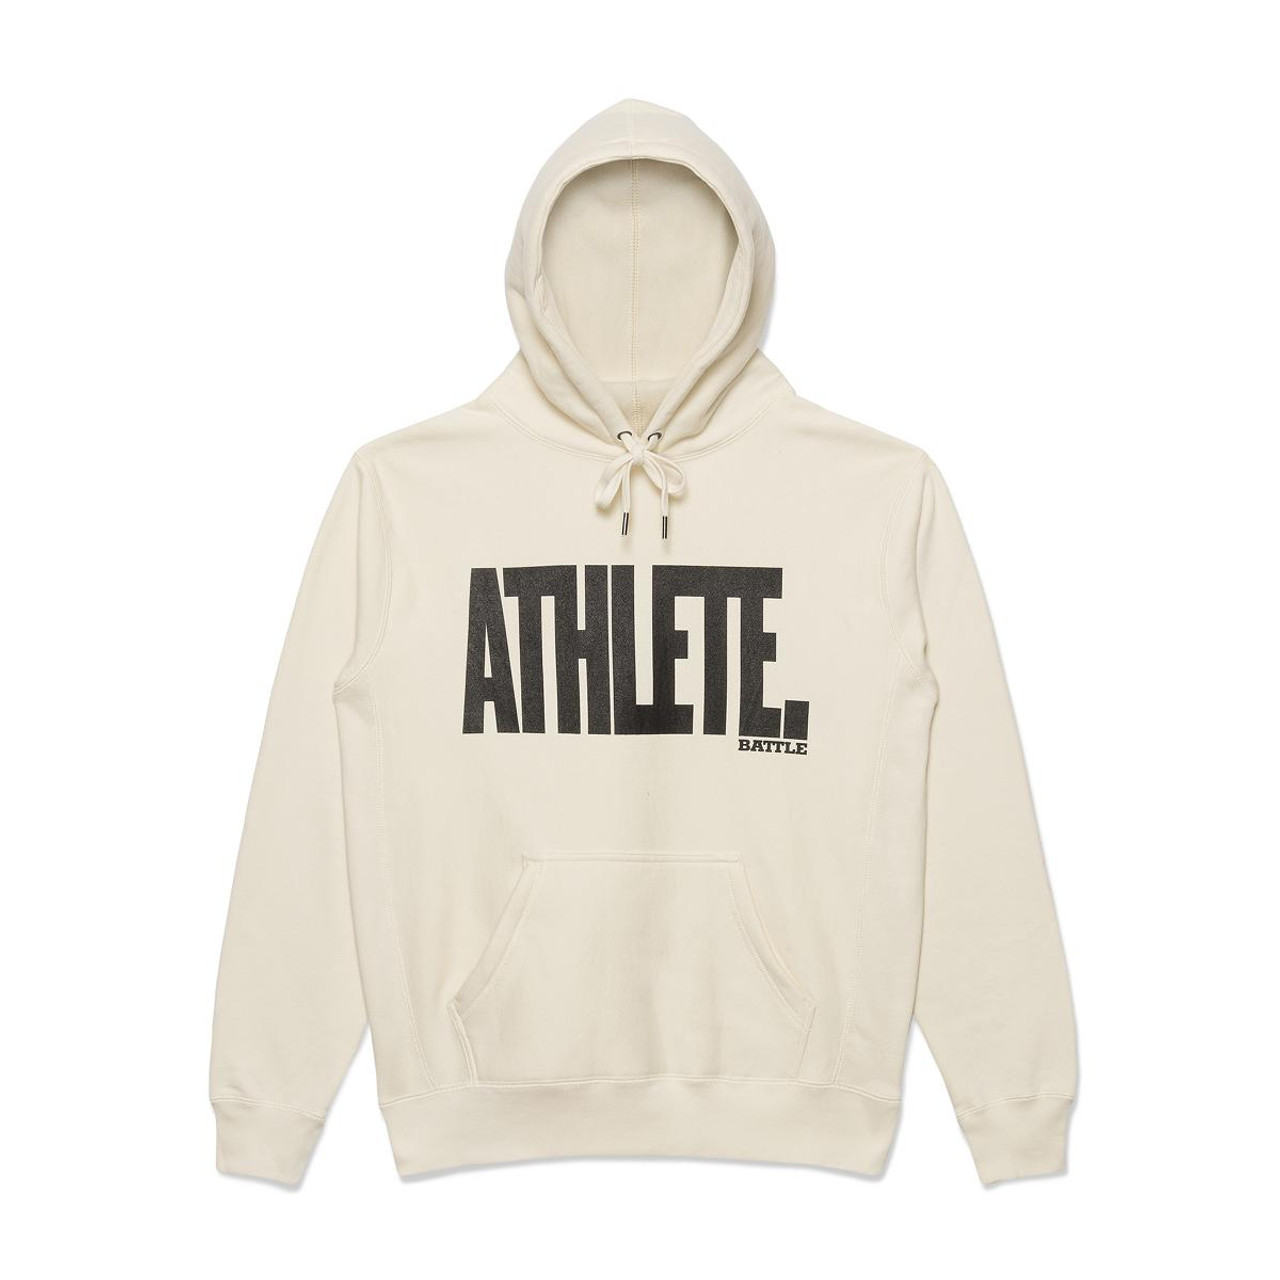 Men's Heavyweight Hooded Pullover Thick & Insulated